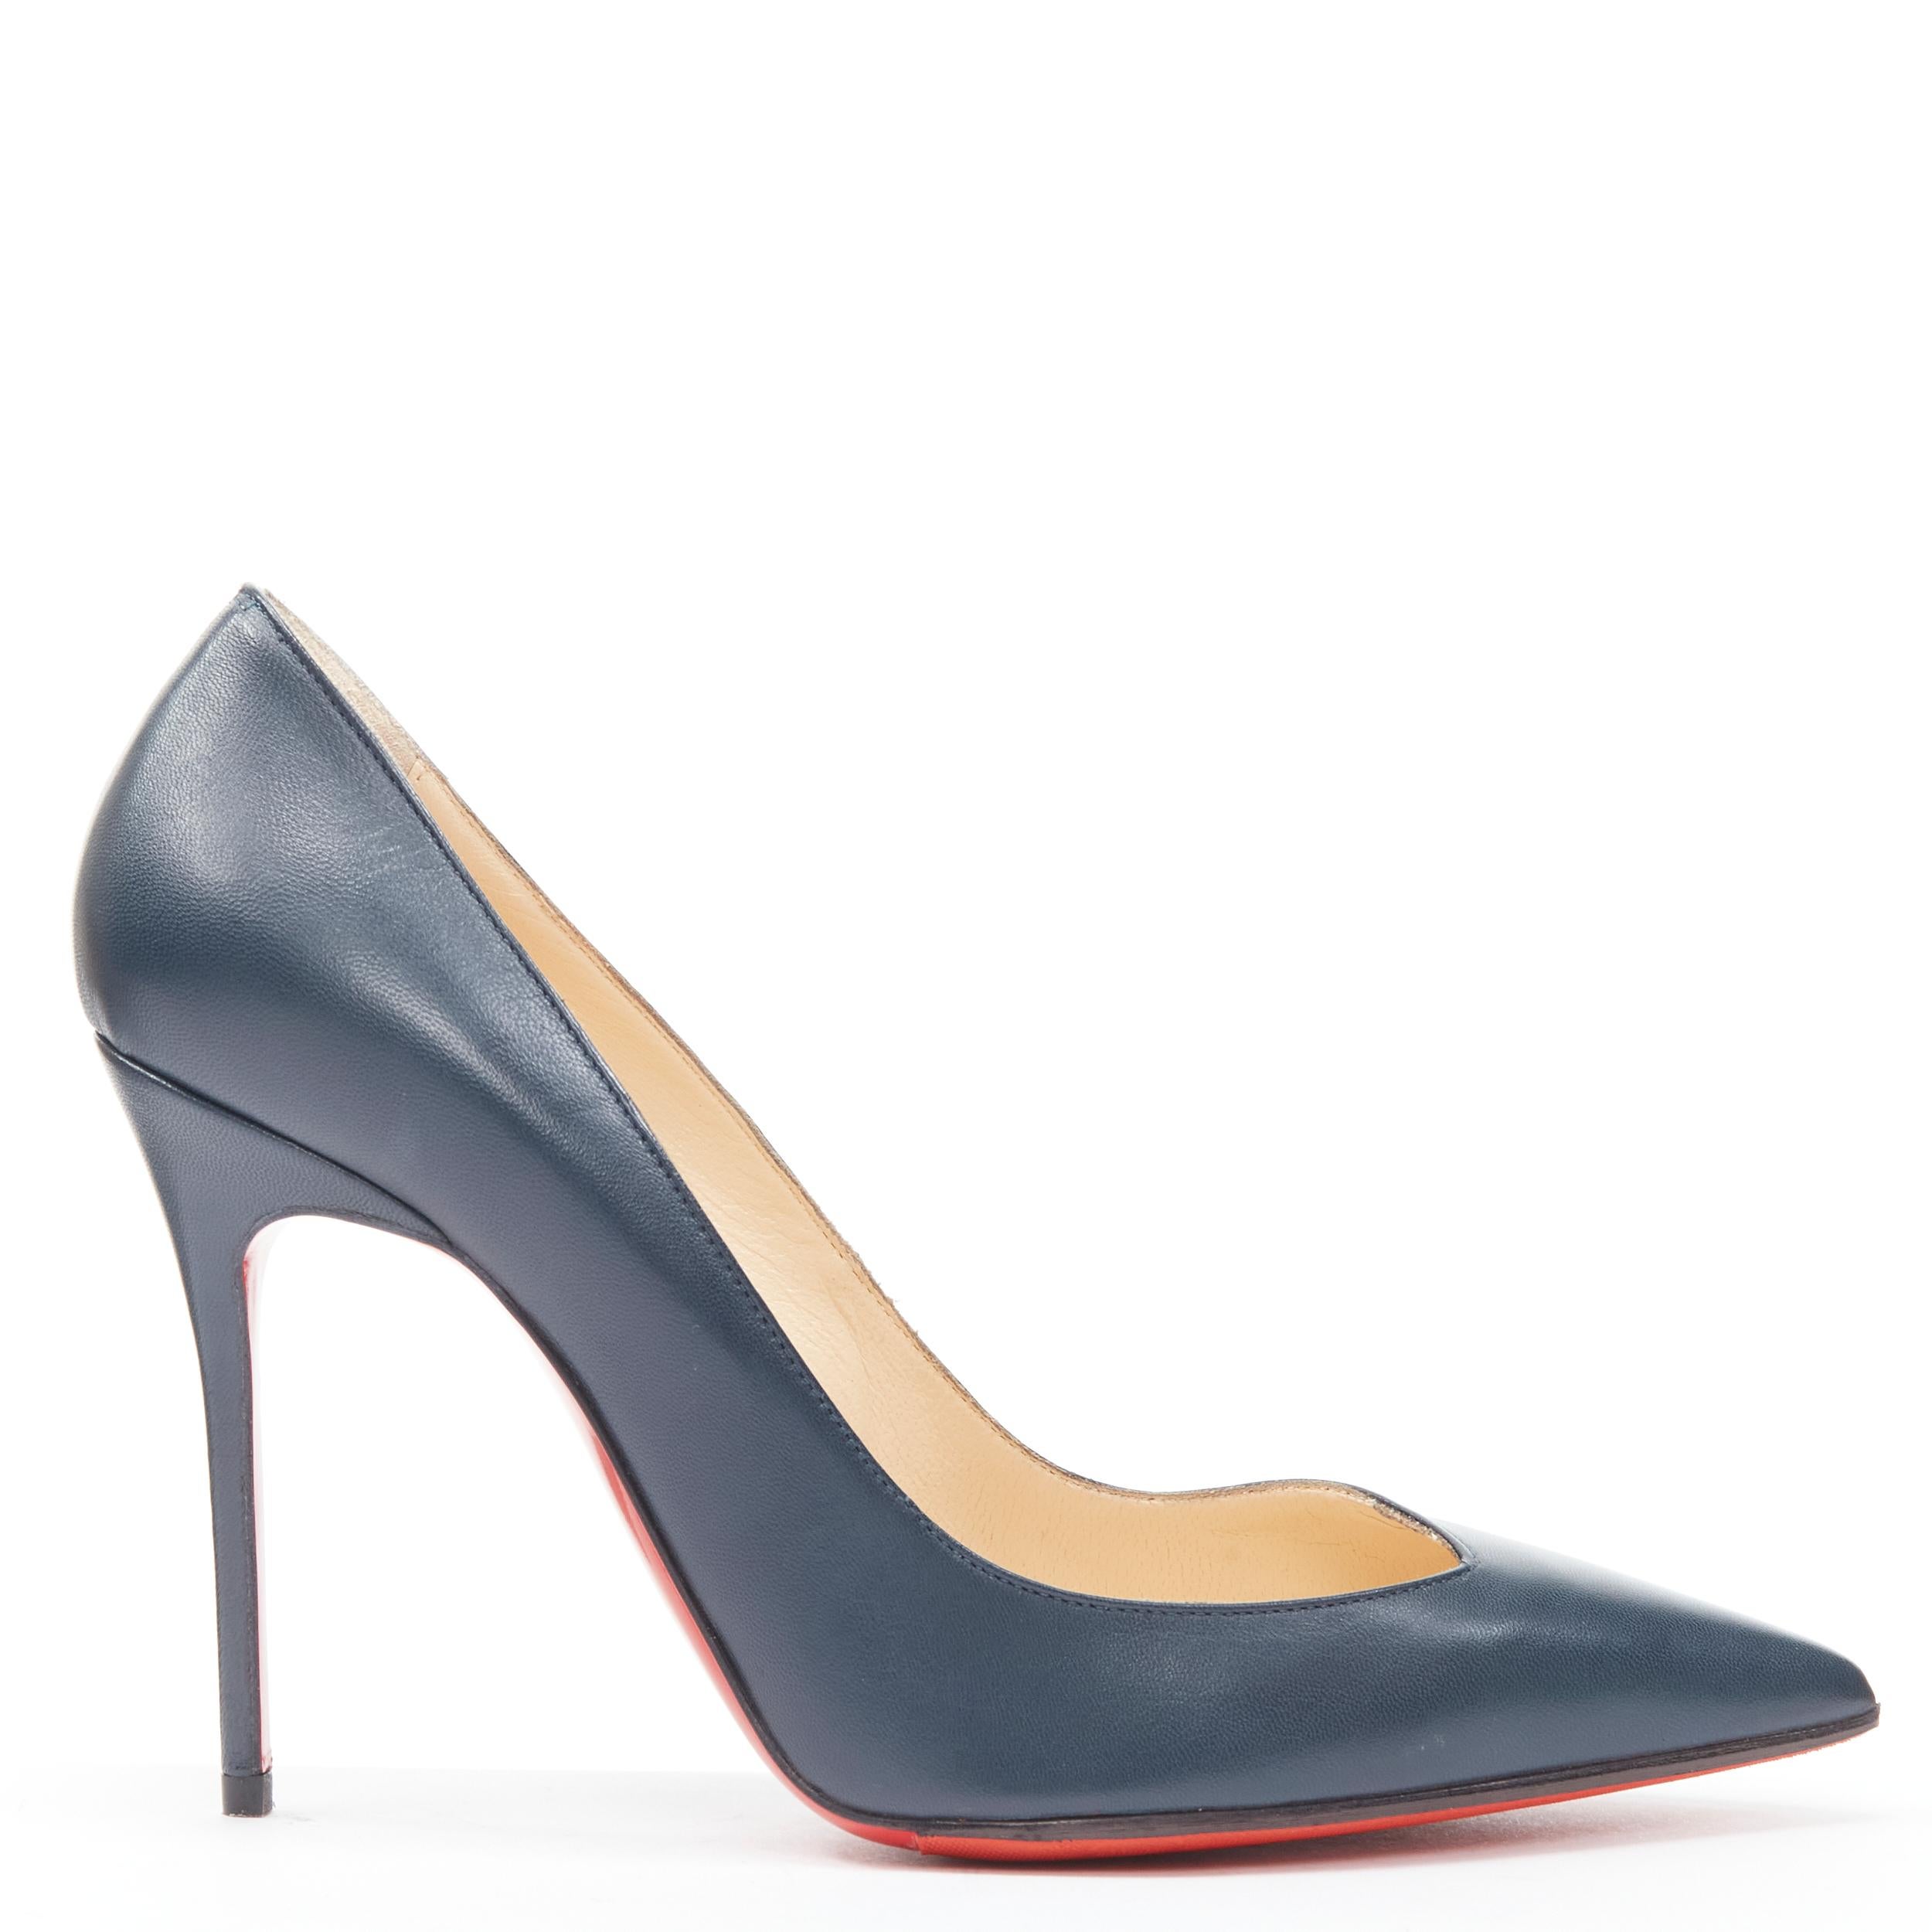 CHRISTIAN LOUBOUTIN Completa 100 Blue Kohl navy angular topline pigalle EU36.5 
Reference: TACW/A00016 
Brand: Christian Louboutin 
Designer: Christian Louboutin 
Model: Completa 100 
Material: Leather 
Color: Navy 
Pattern: Solid 
Extra Detail: